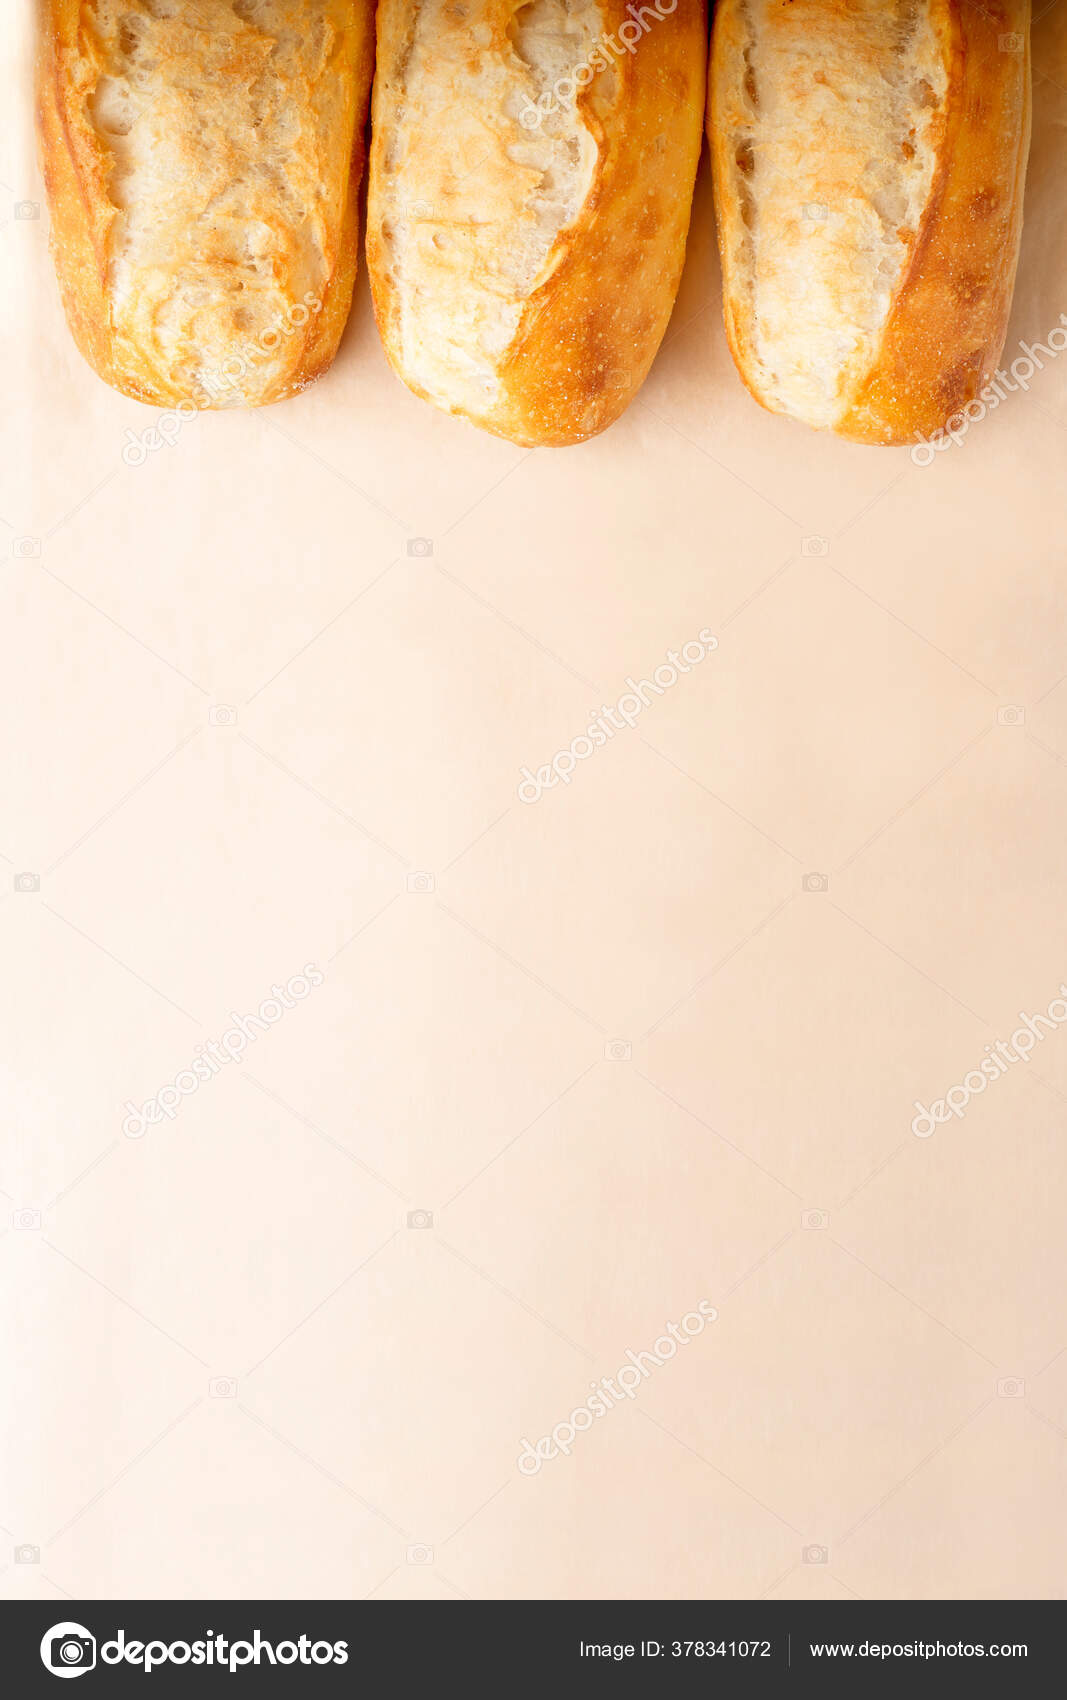 French baguettes in a row on light brown background with copy